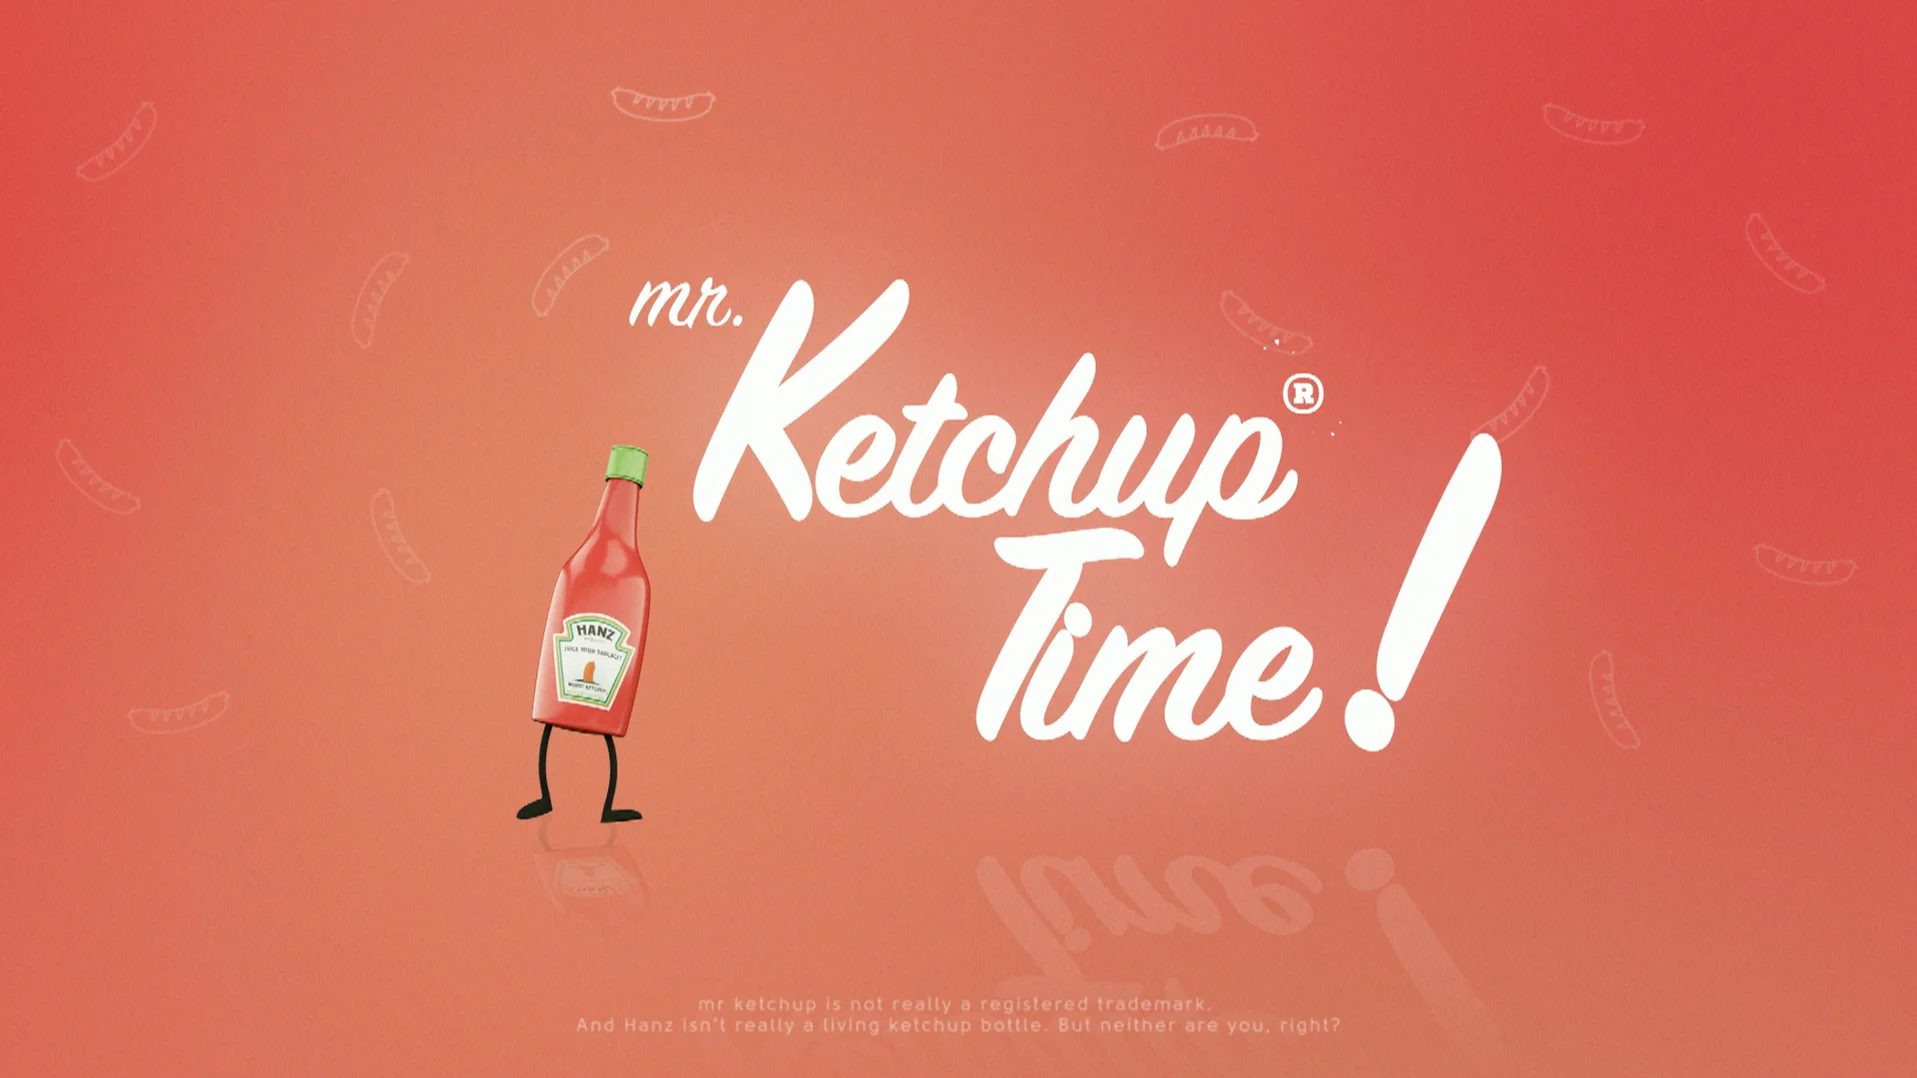 What is Ketchup With A Cause? on Vimeo